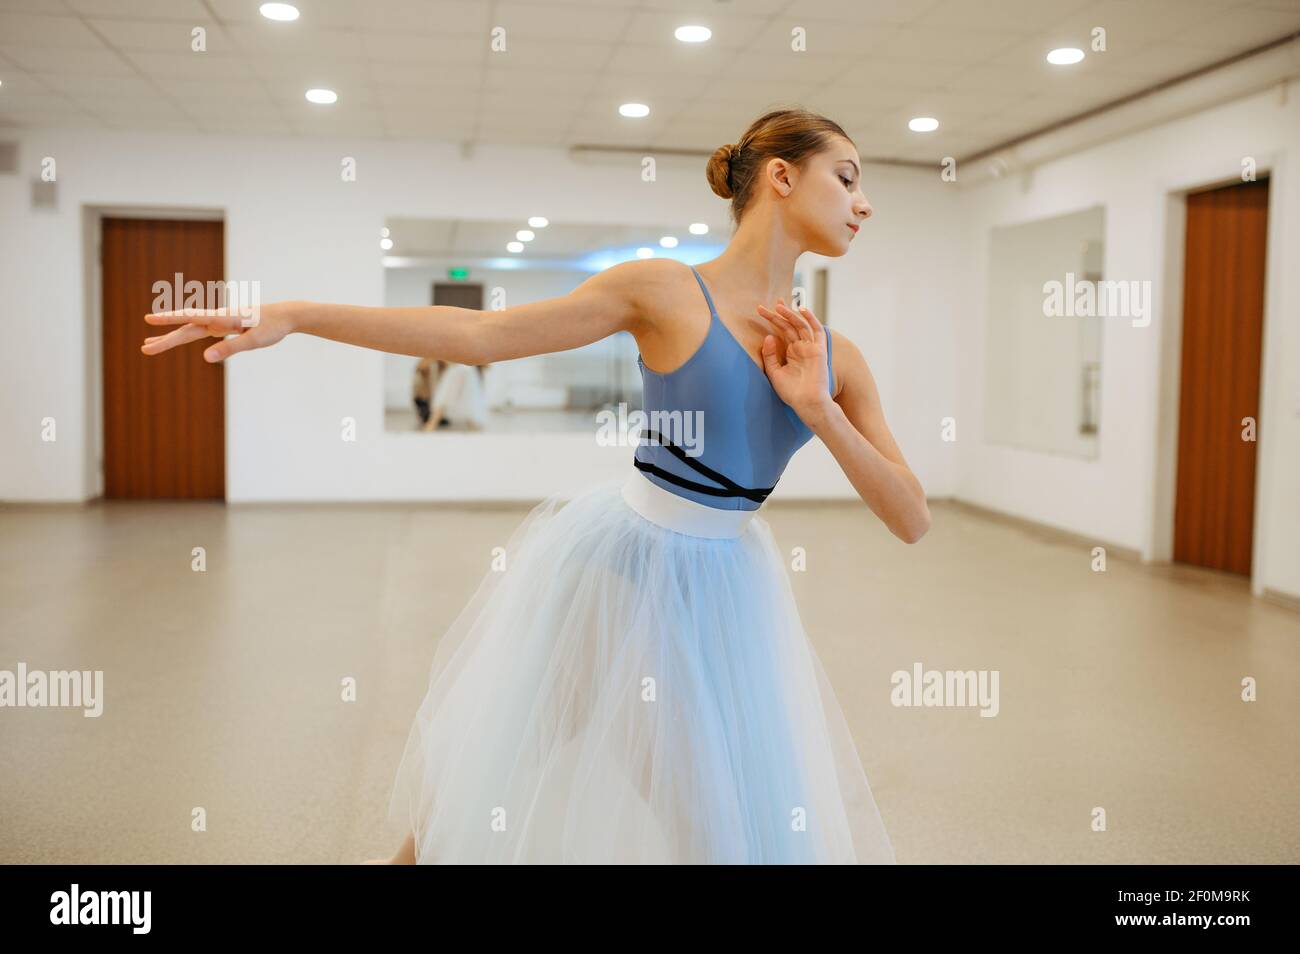 Young ballerina rehearsing at the barre in class Stock Photo